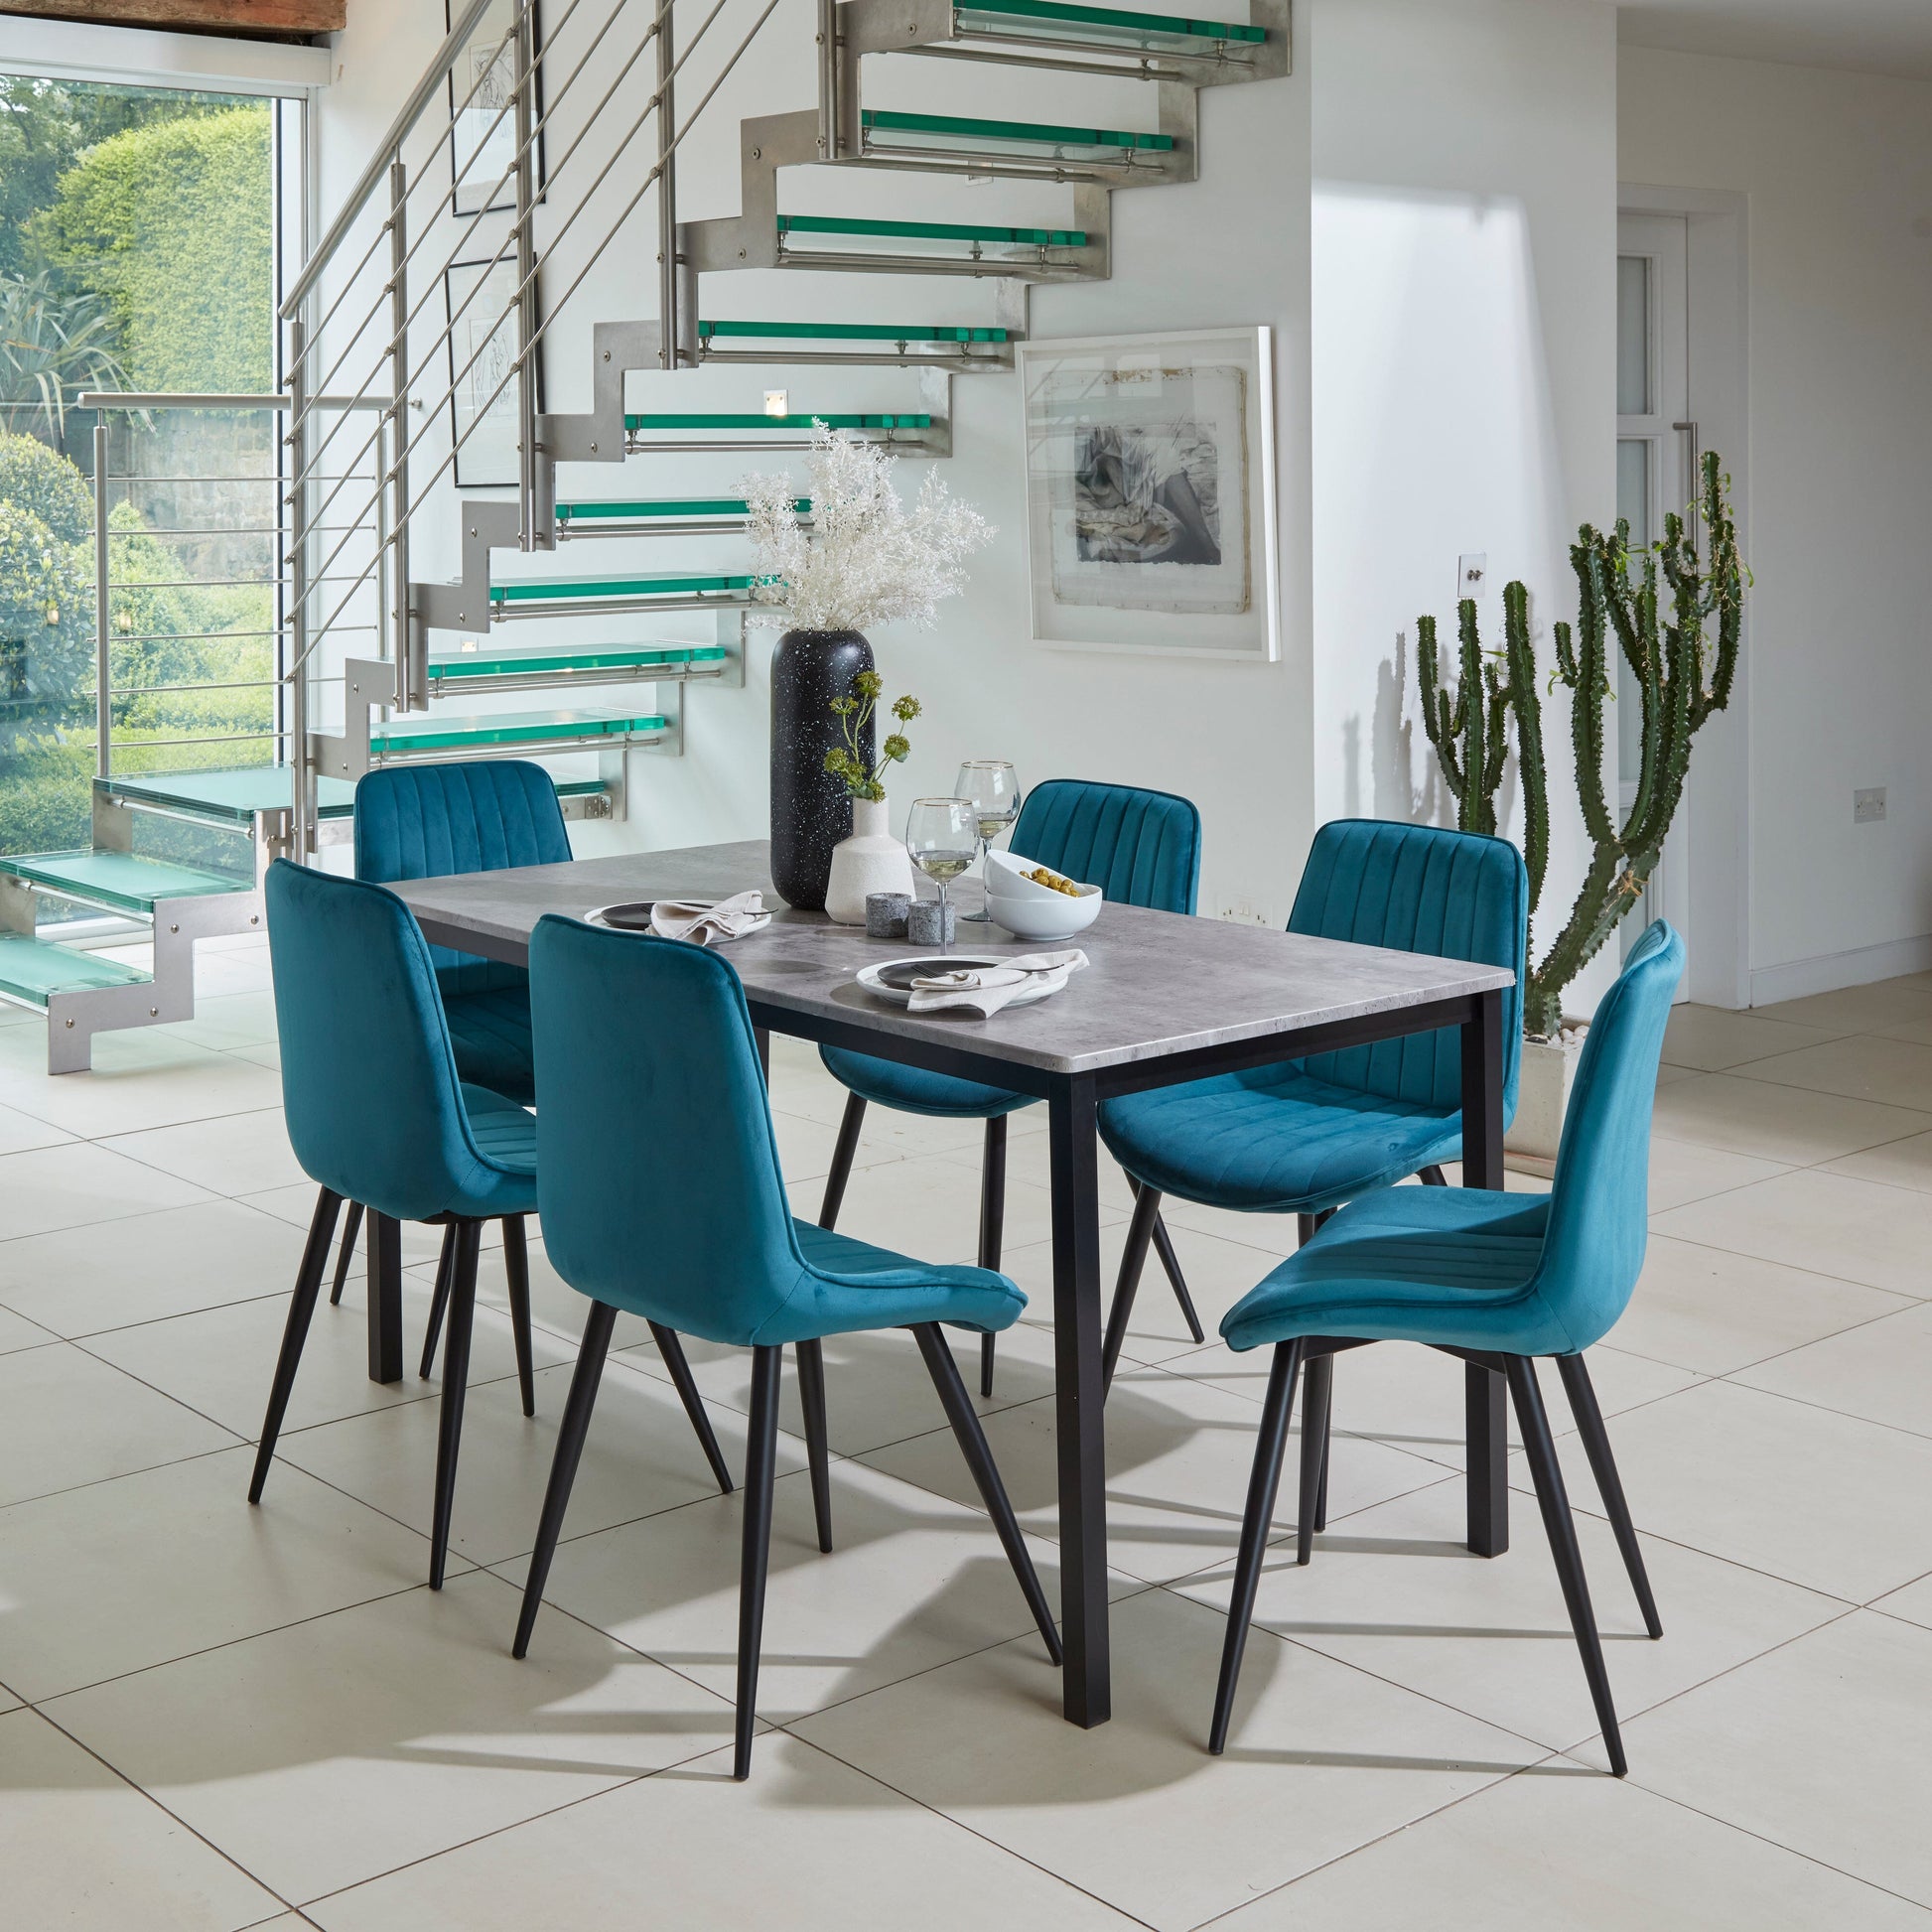 Milo Black Concrete Table effect Dining Table Set - 6 seater - Bella Teal and Black chairs set